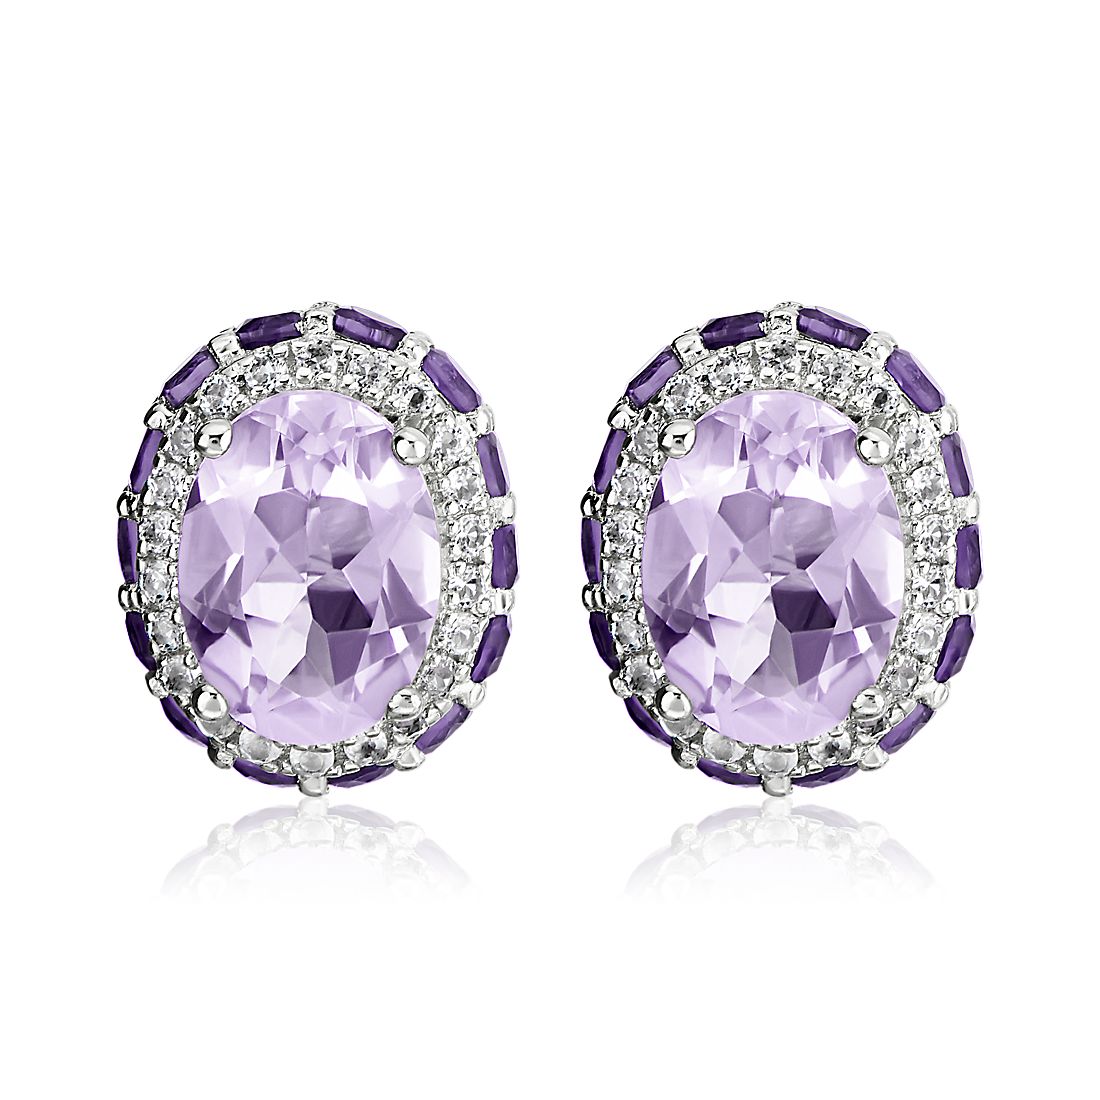 Oval Rose de France Earrings with Amethyst and White Topaz Halo in ...